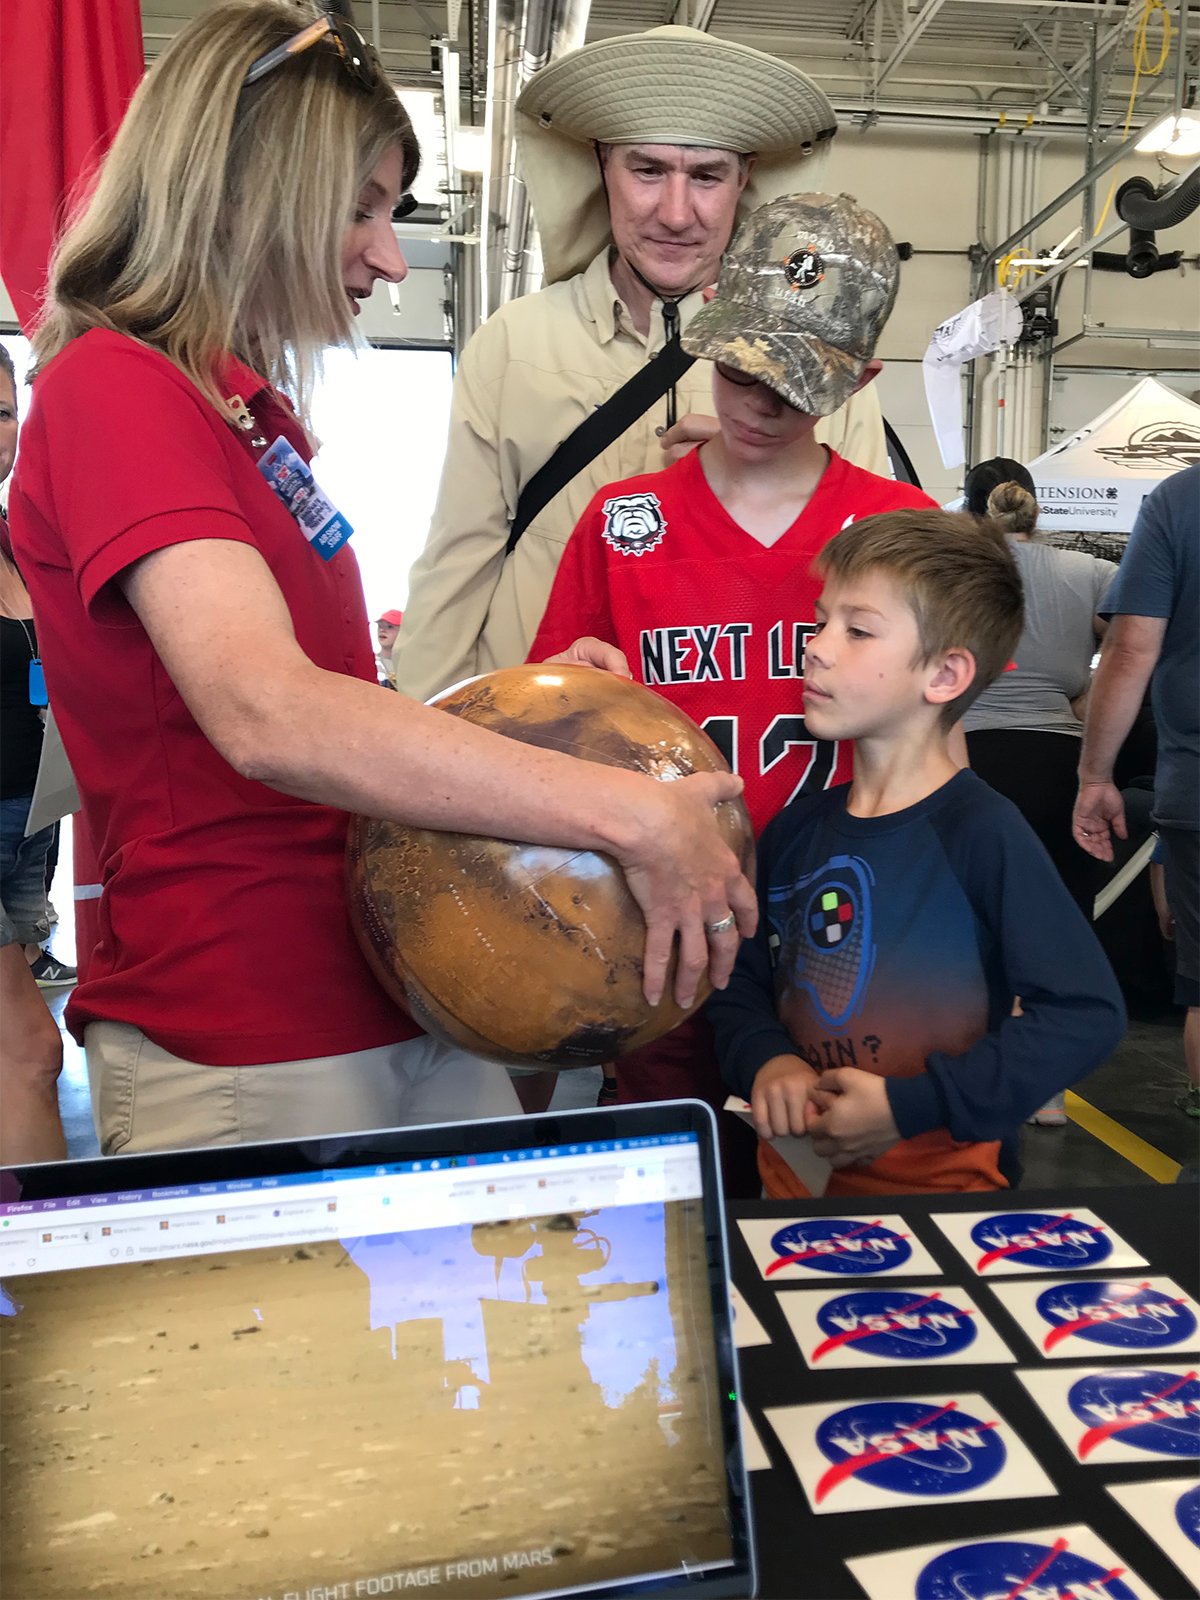 Interested public, including adults and children, interacted with NASA Mars Exploration team members at the Utah Air Show, held at Hill Air Force Base June 25-26, 2022.